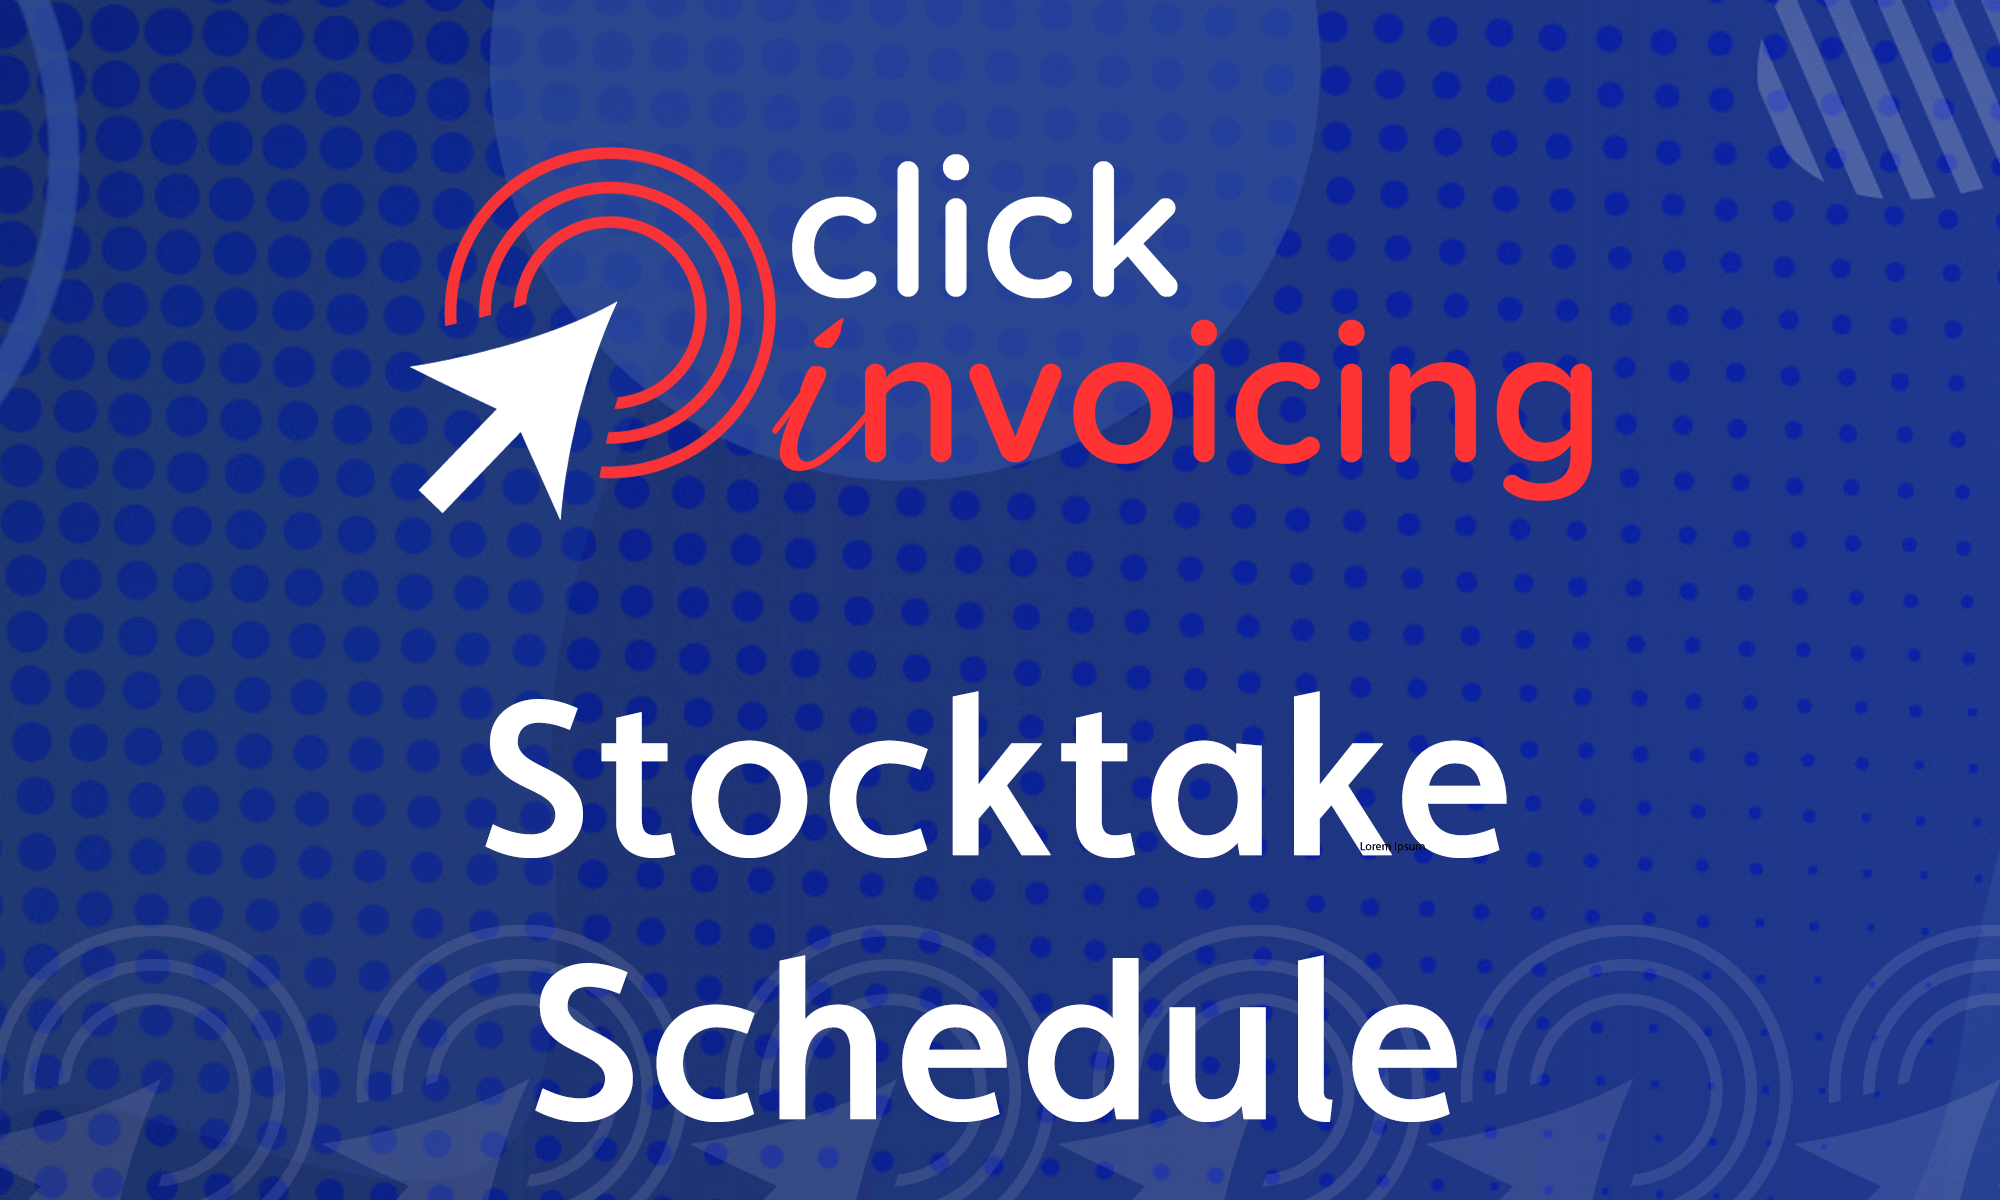 Featured image for “Click Invoicing Stocktake Schedule”